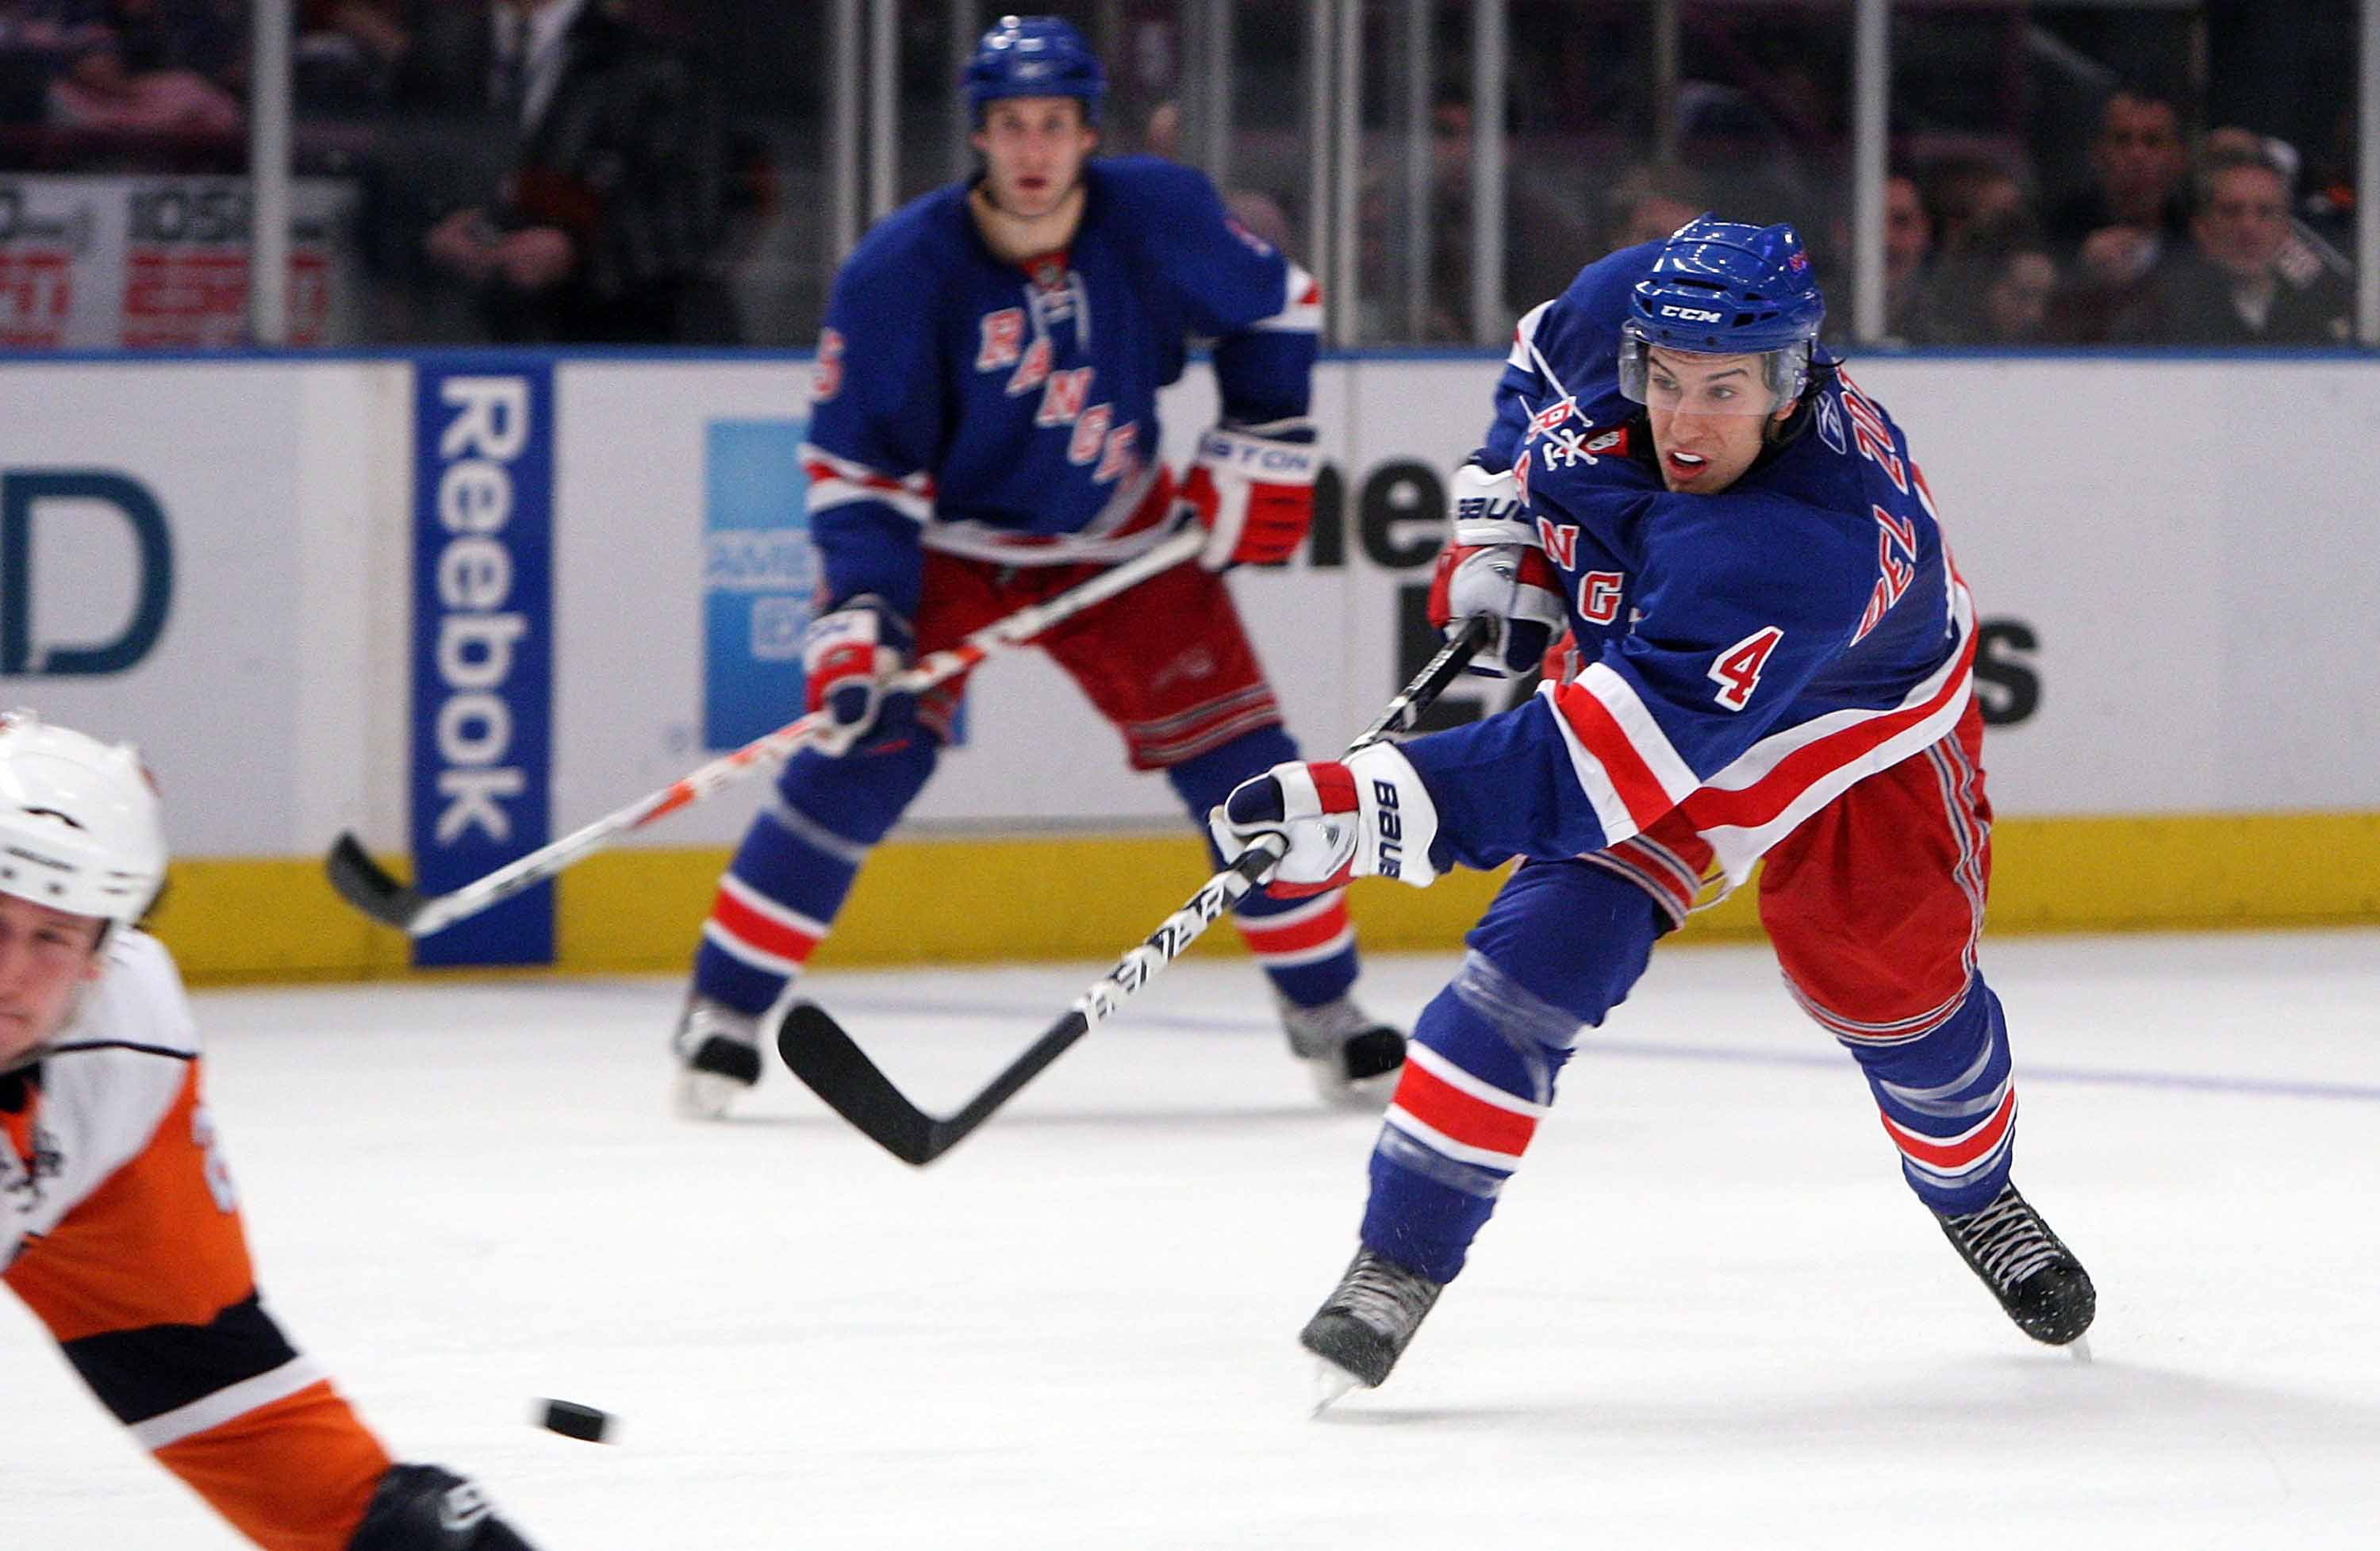 Is the Current State of NYC Driving Away Potential Free Agents? Tyler Motte  Signs with Tampa; The NHL's “Middle Class” Being Phased Away, Alice Cooper,  TNT's Paul Bissonnette Suggests a Violent Crime